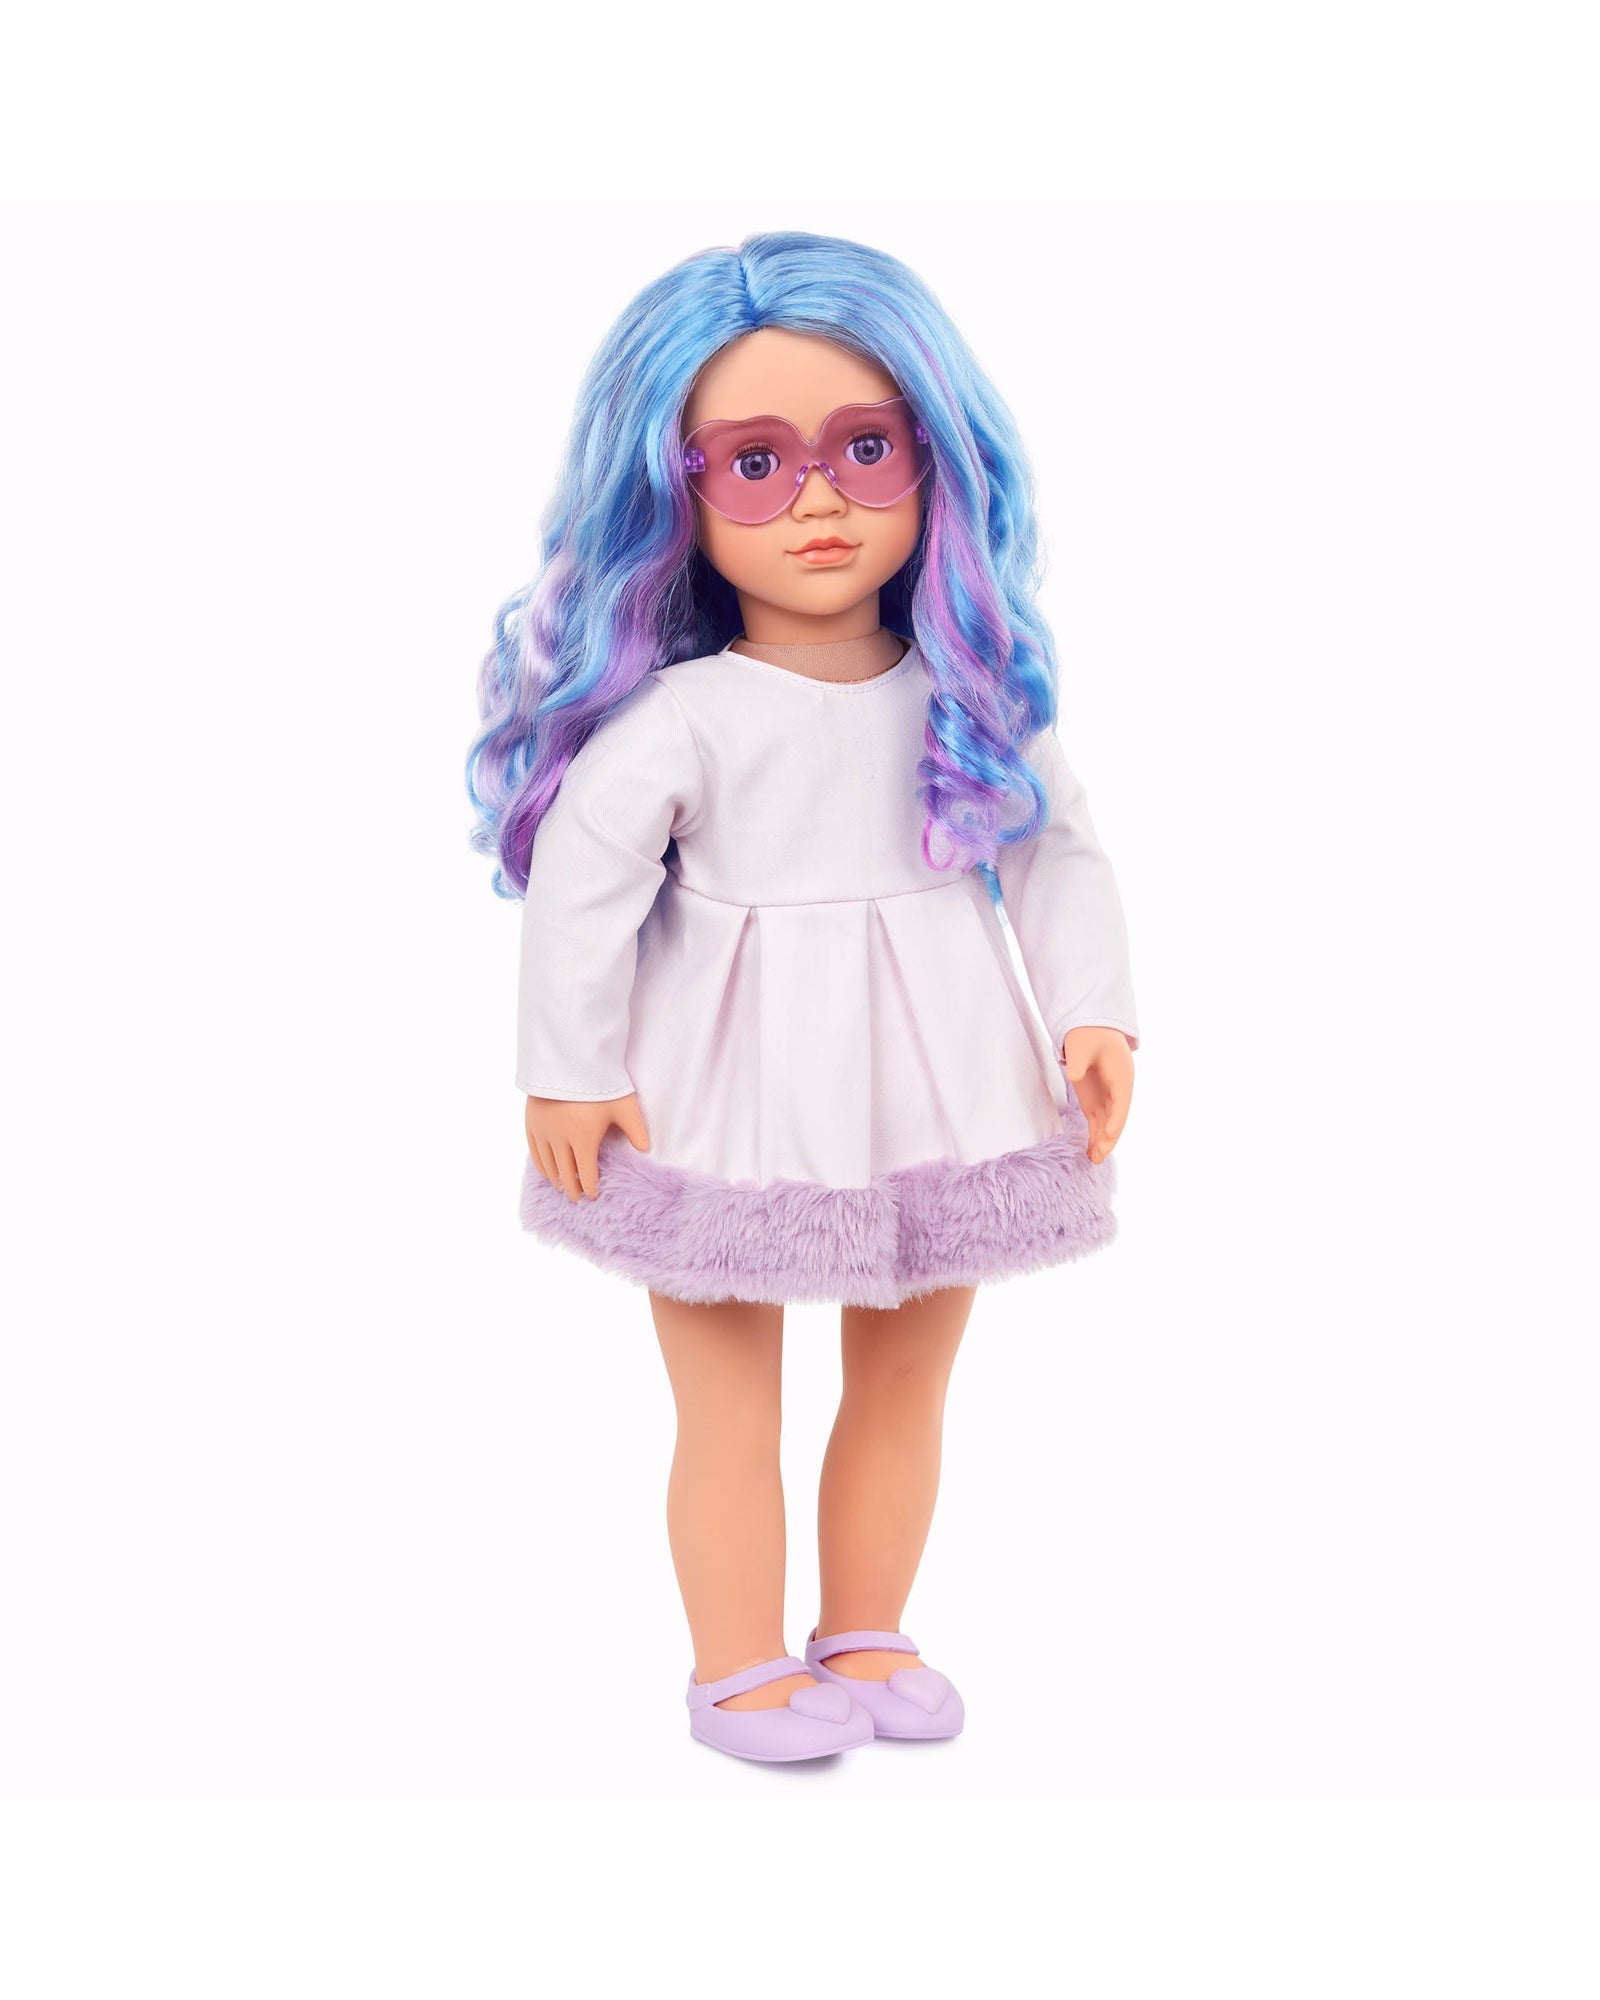 Shop Our Generation Coral Surfer Doll - Our Generation, delivered to your  home